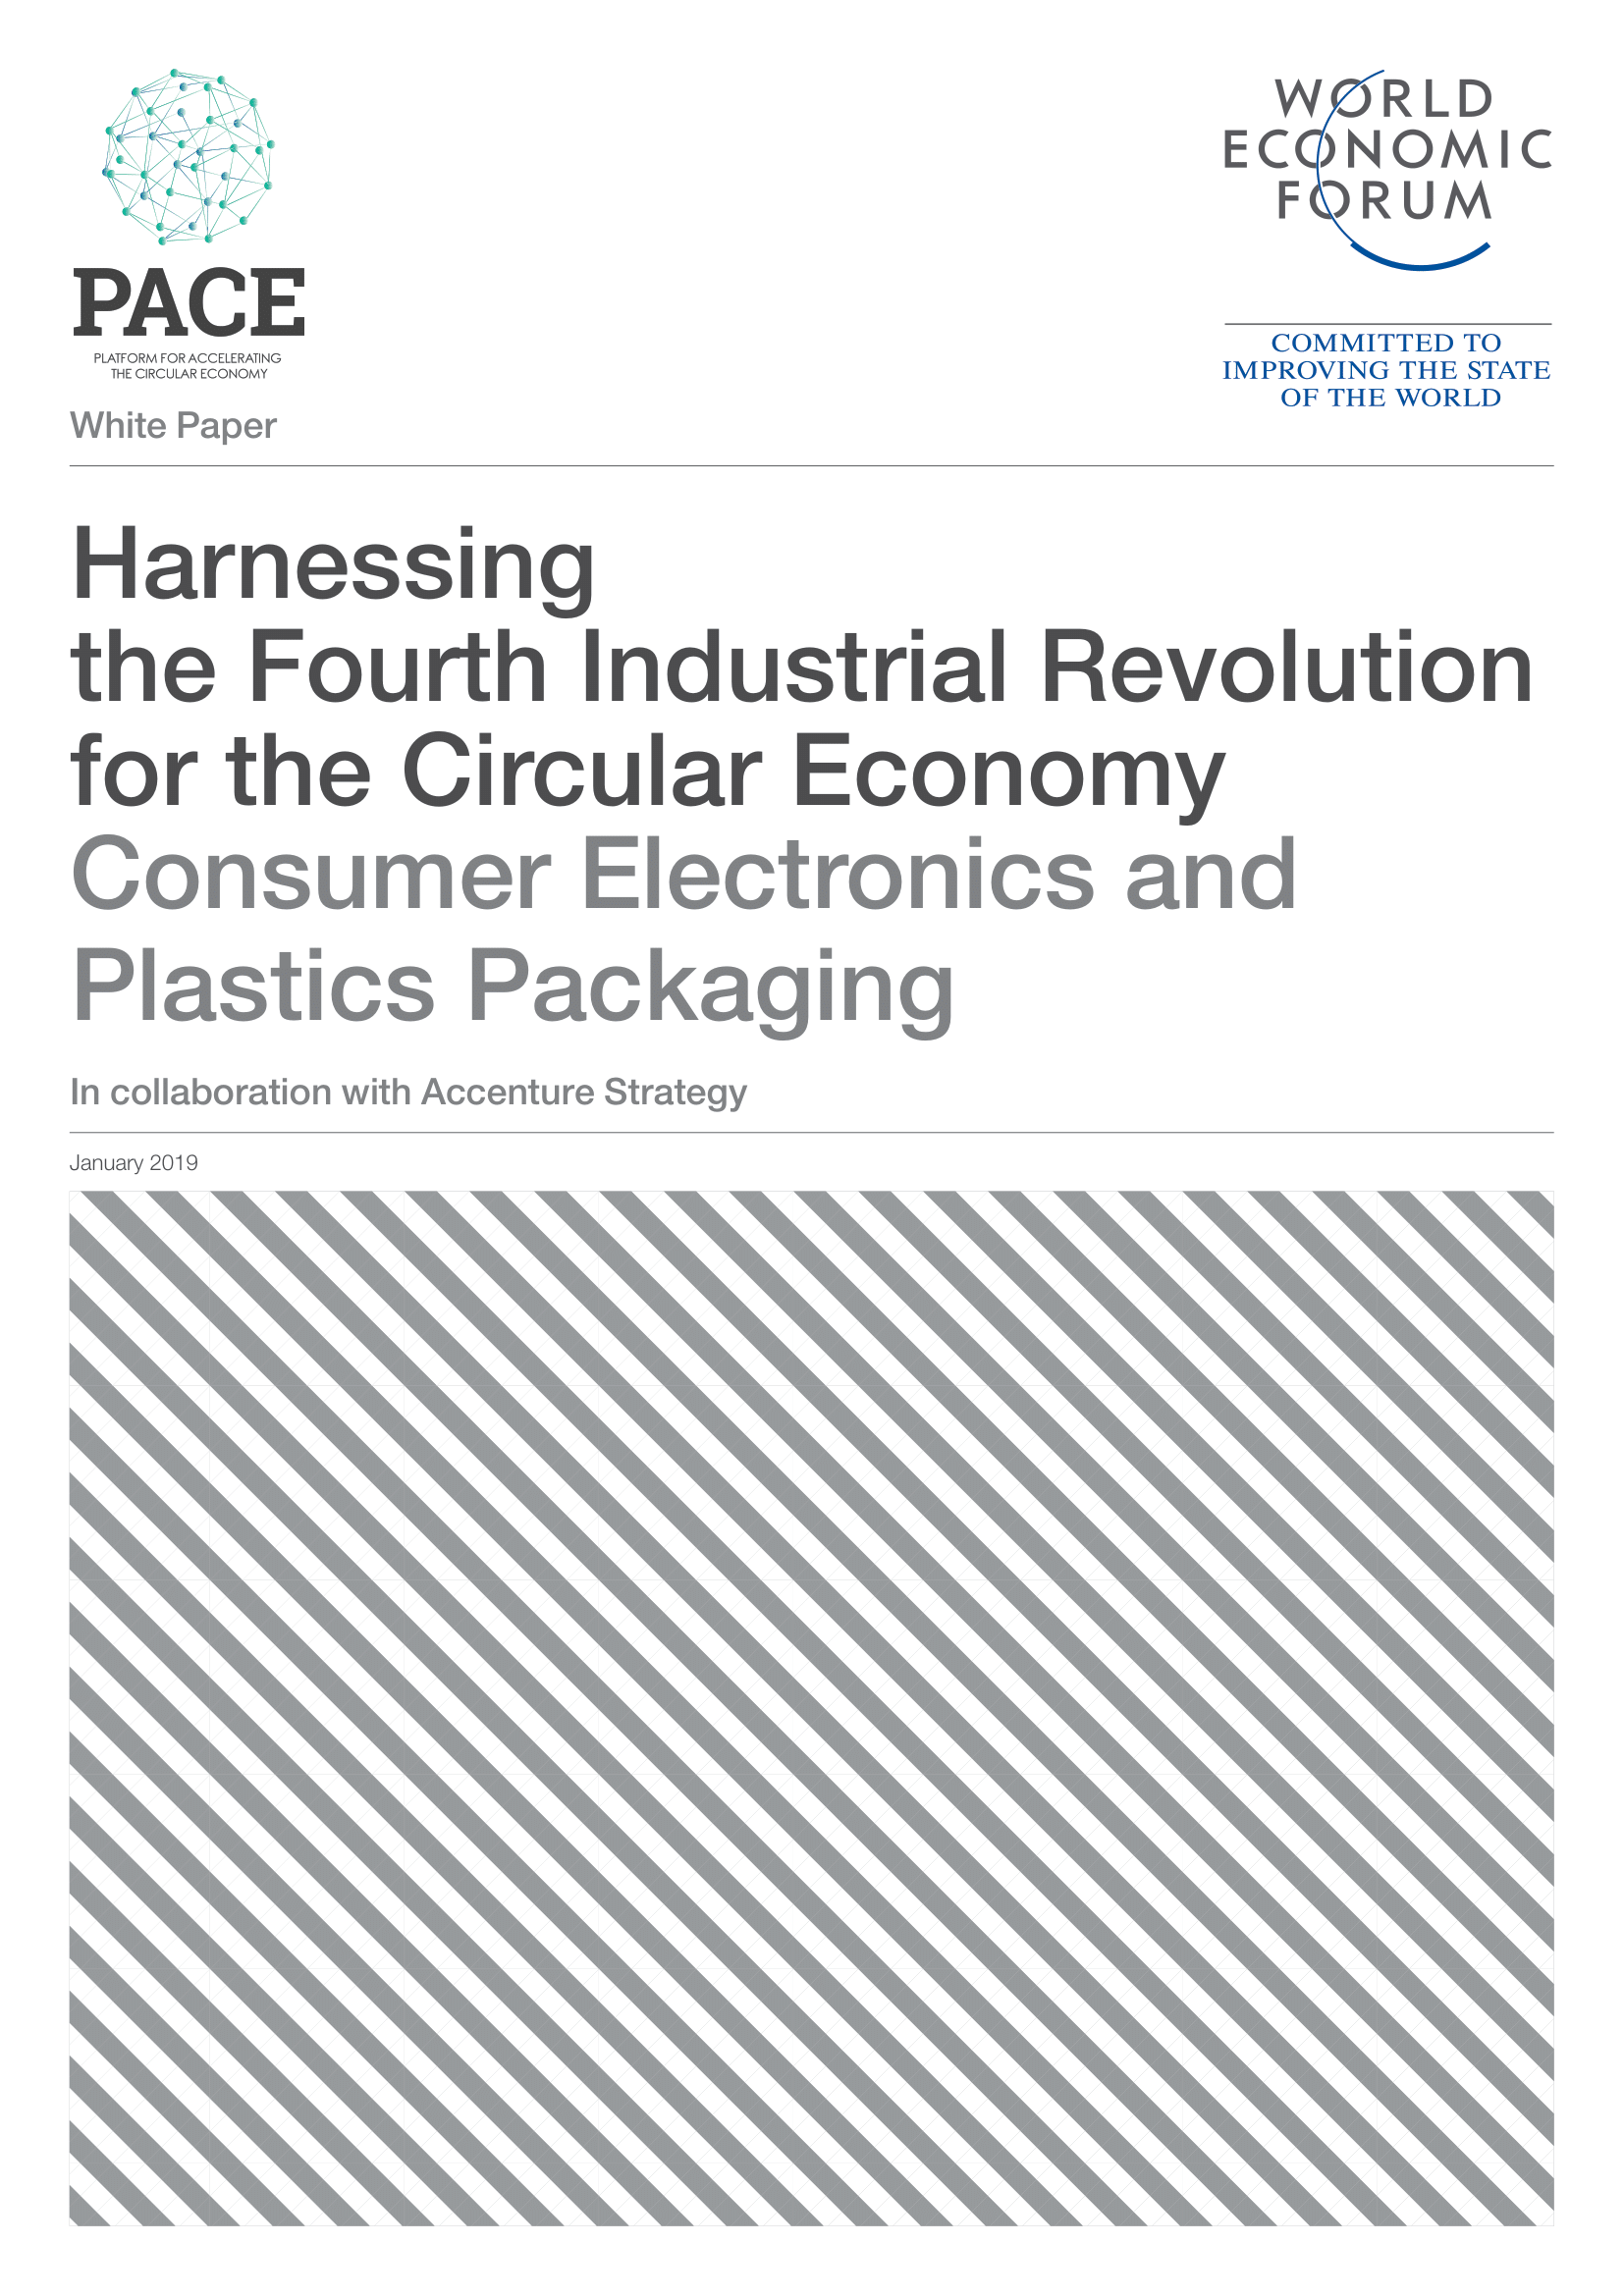 Harnessing the Fourth Industrial Revolution for the Circular Economy Consumer Electronics and Plastics Packaging